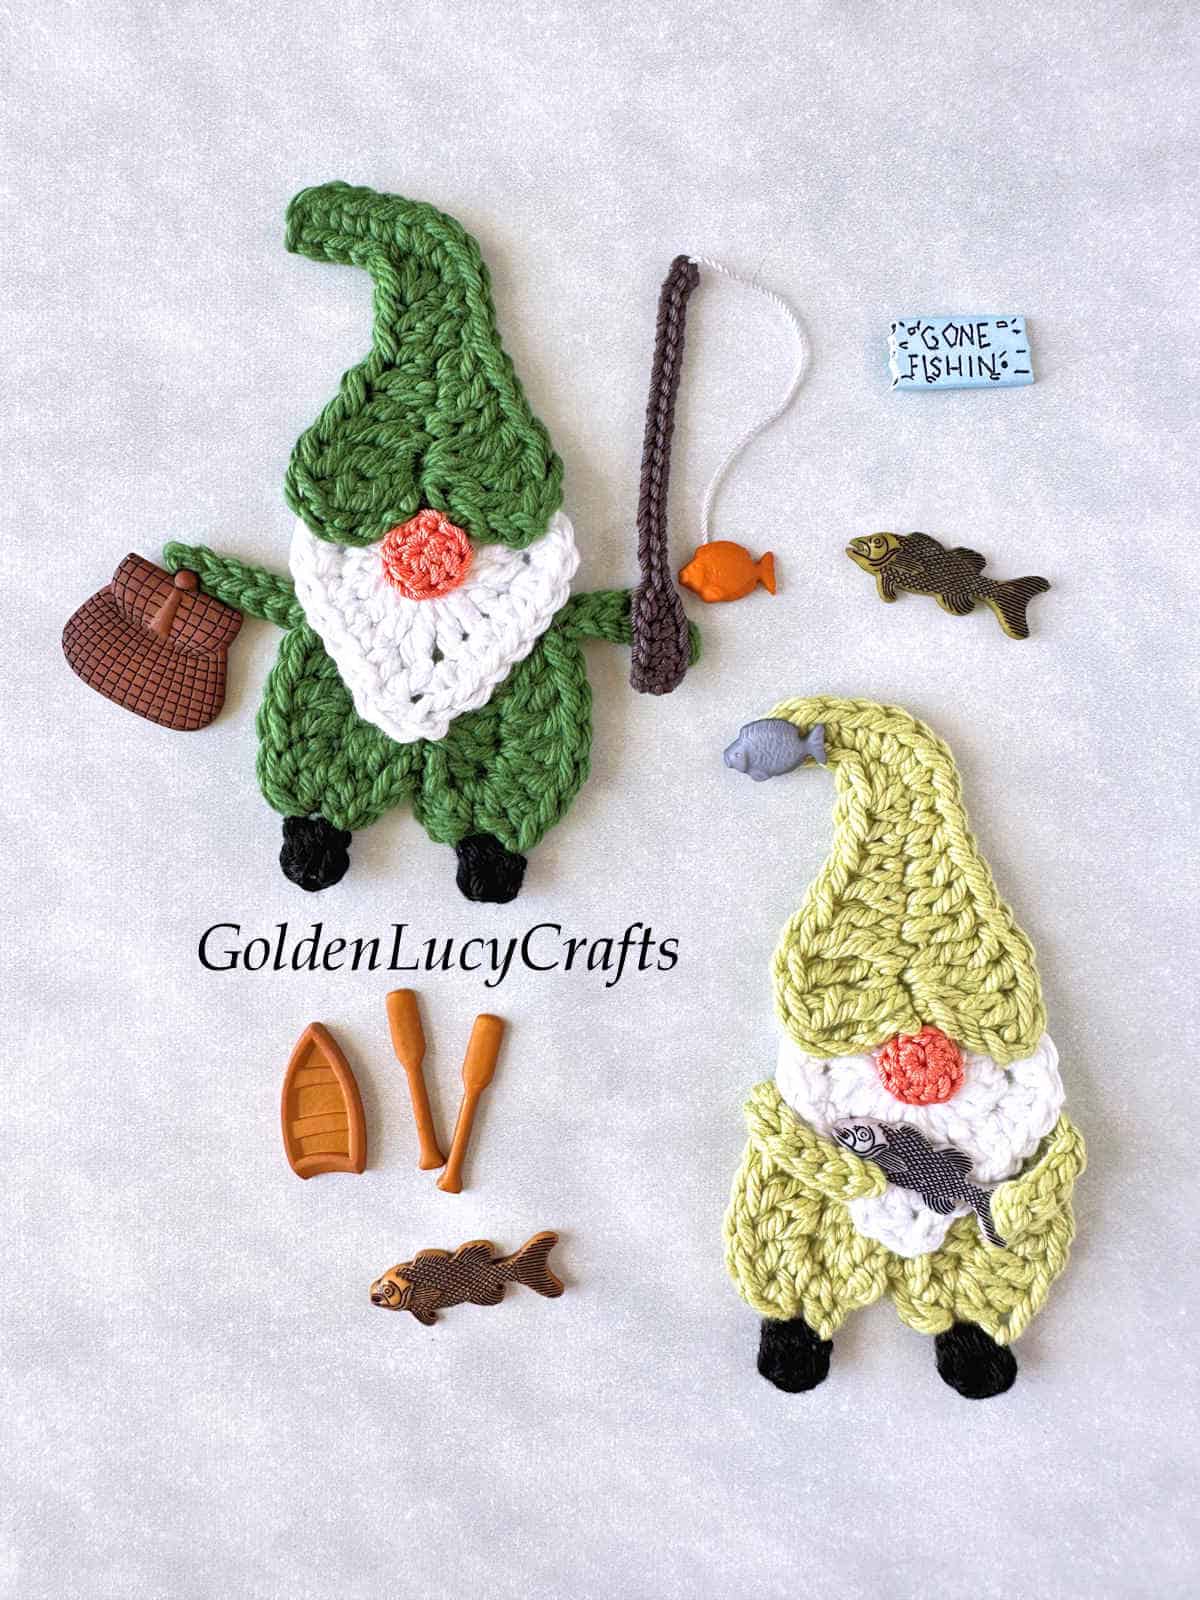 Two crocheted fishing gnomes and fishing-themed craft buttons.